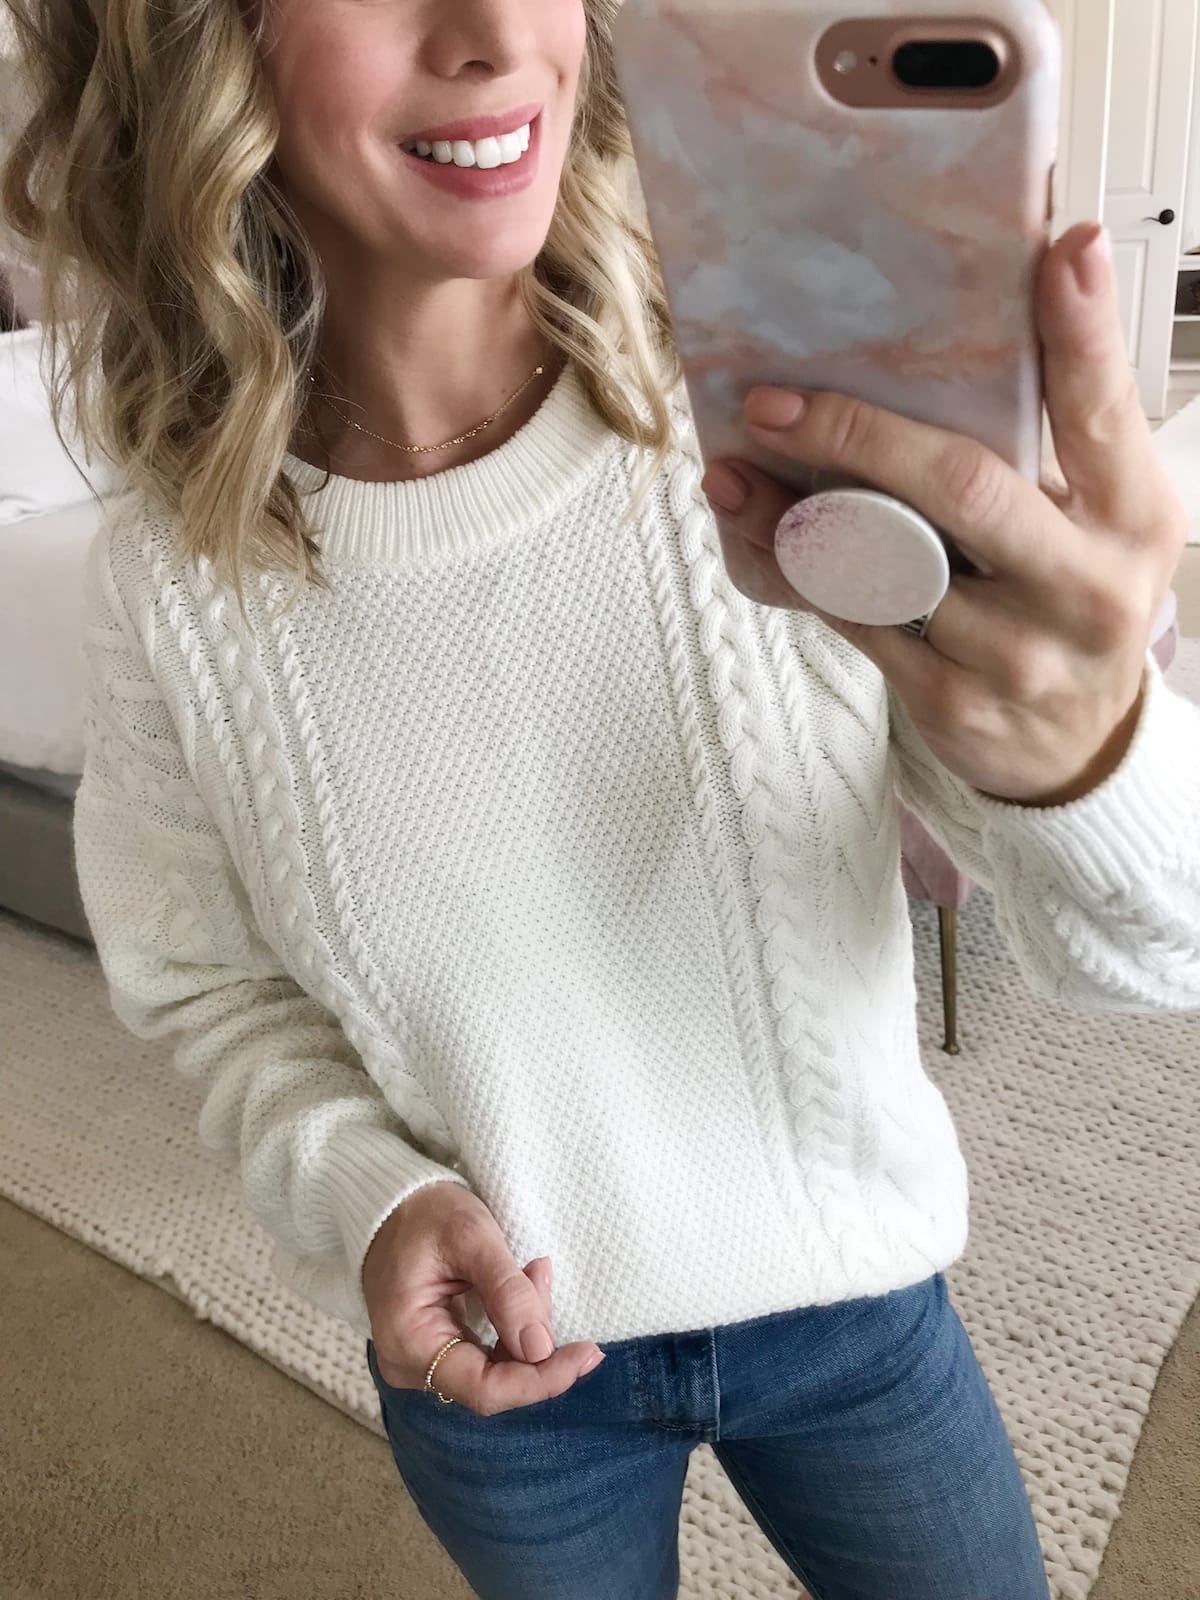 White sweater and necklace